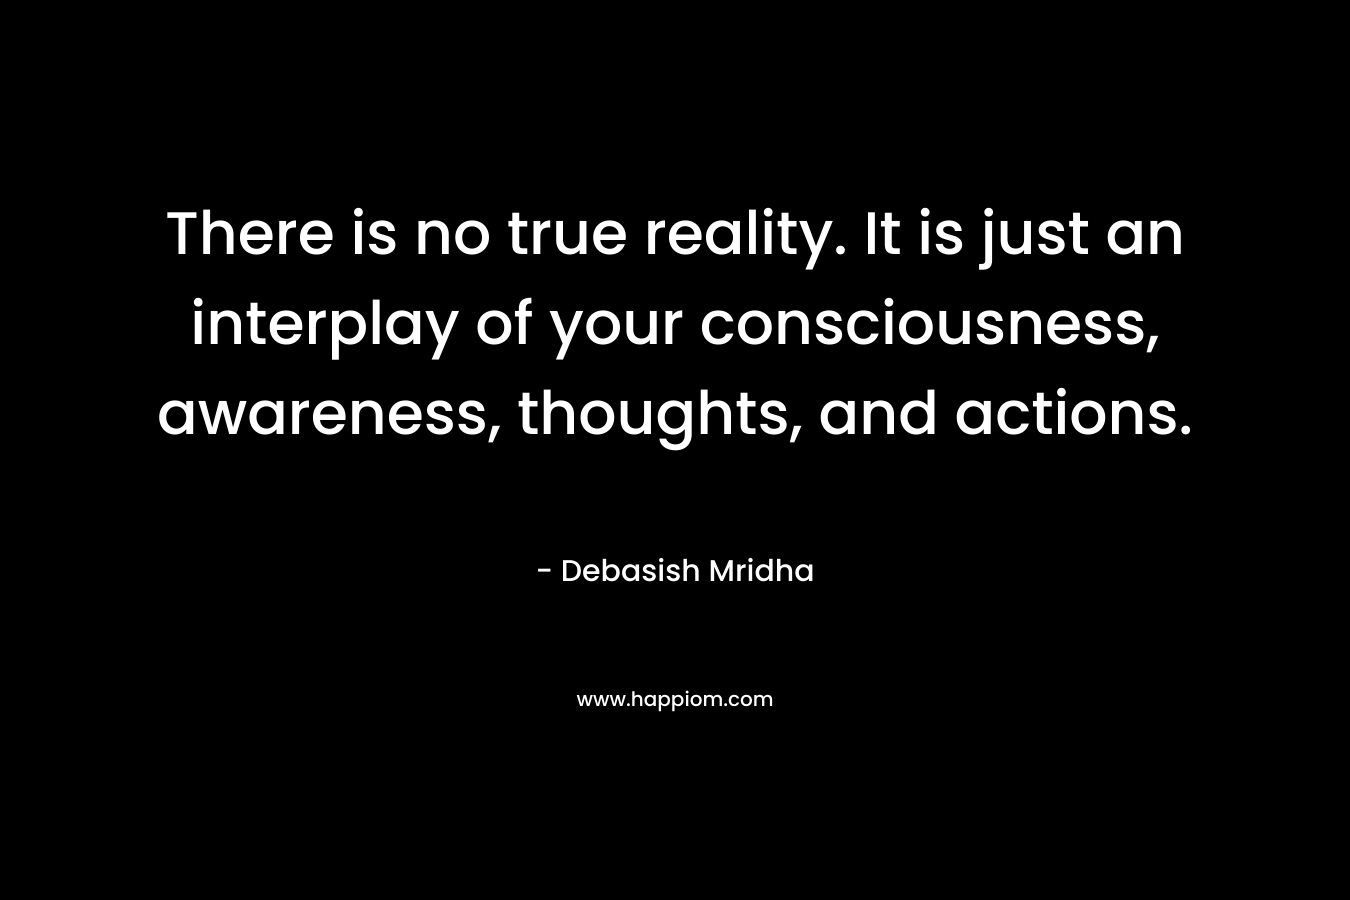 There is no true reality. It is just an interplay of your consciousness, awareness, thoughts, and actions.